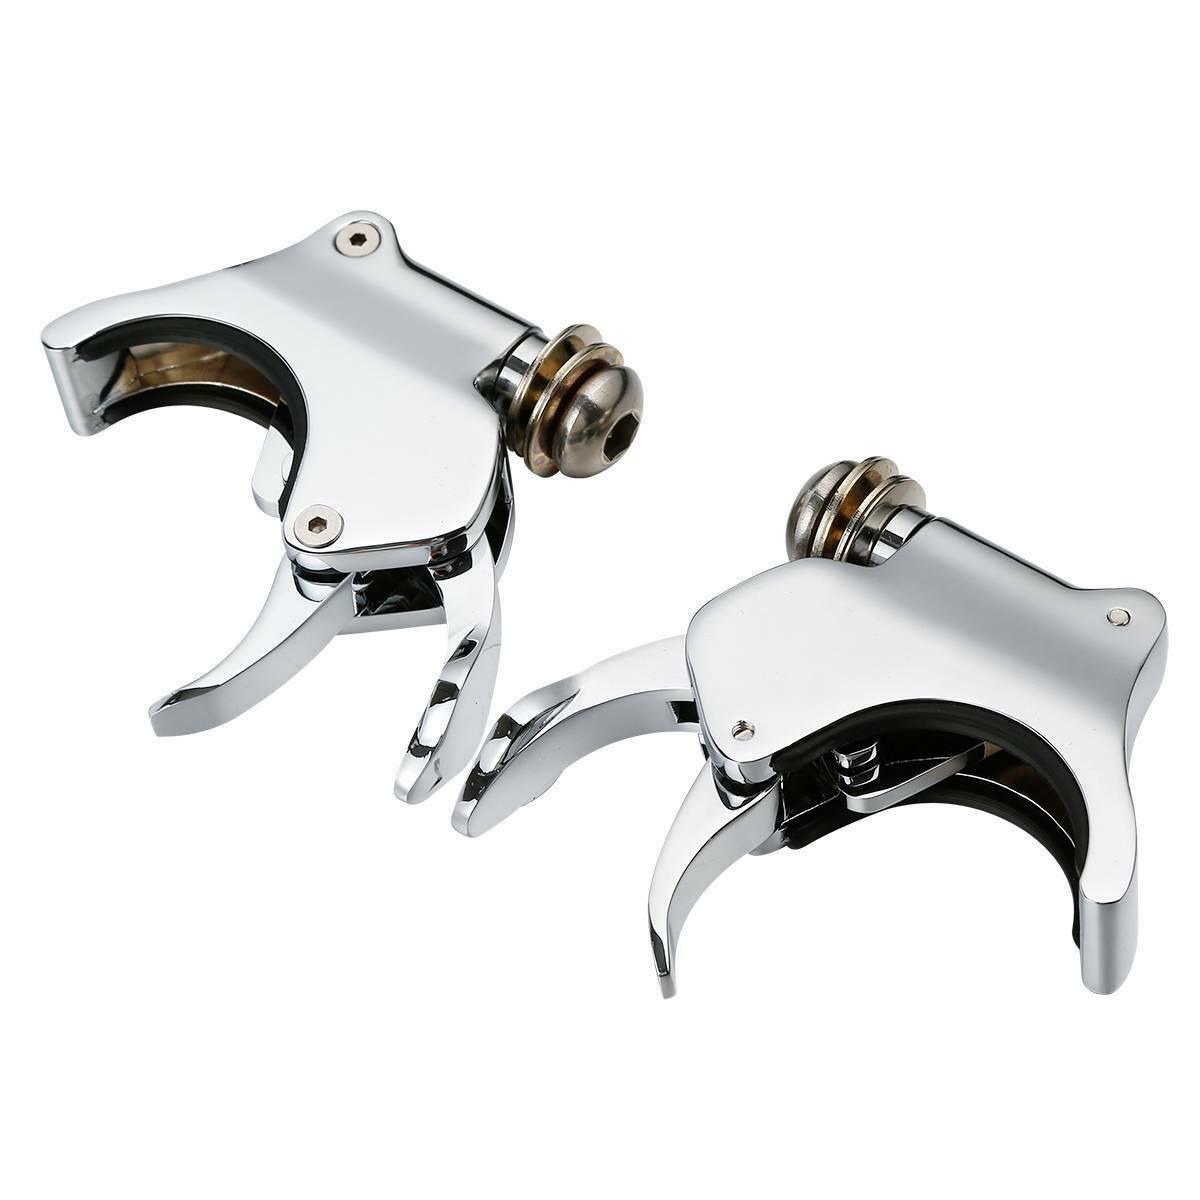 41mm Windshield Windscreen Clamp Fit For Harley Dyna FXDWG Softail Custom FXST - Moto Life Products